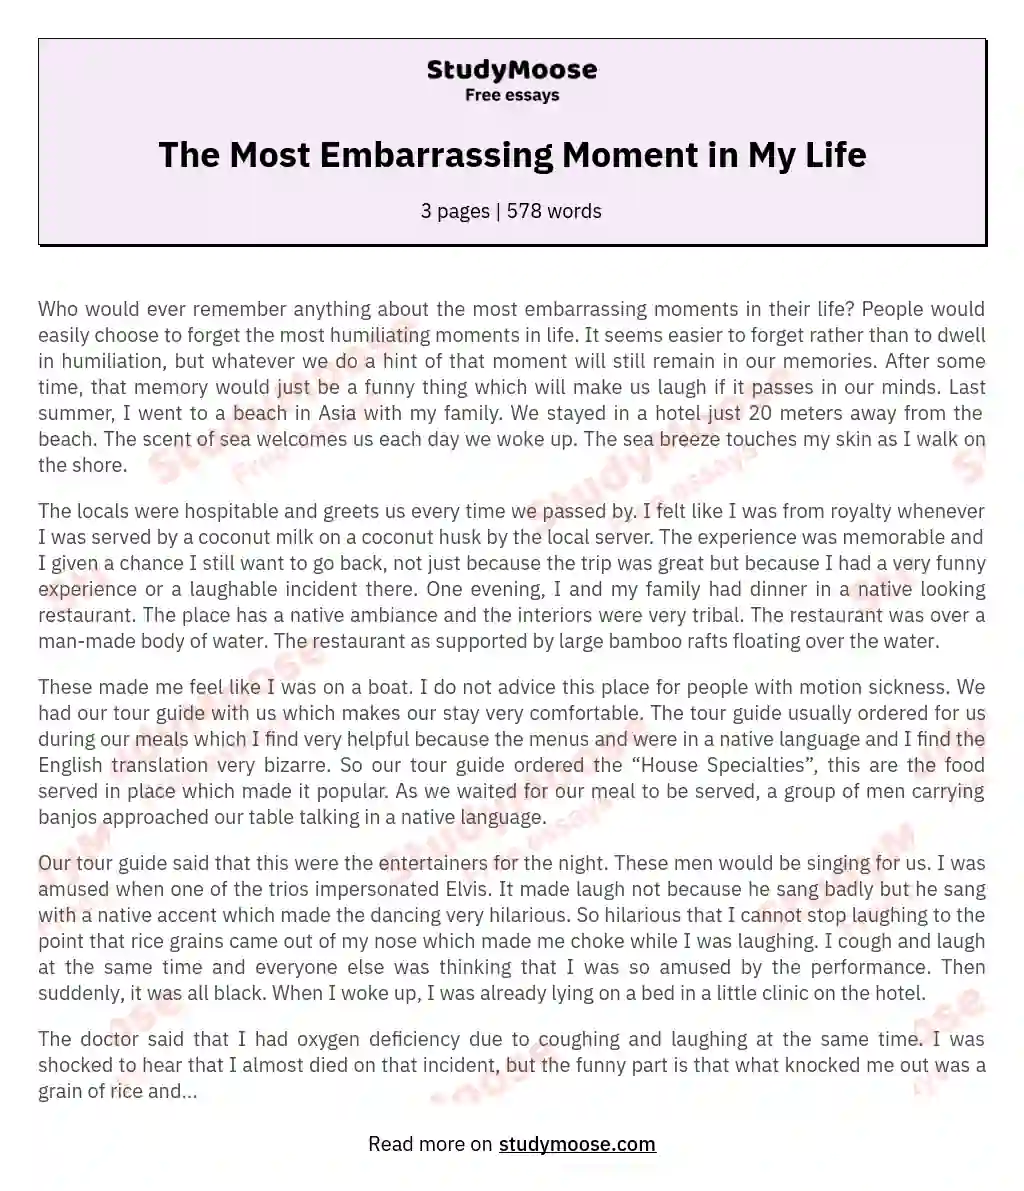 The Most Embarrassing Moment in My Life essay